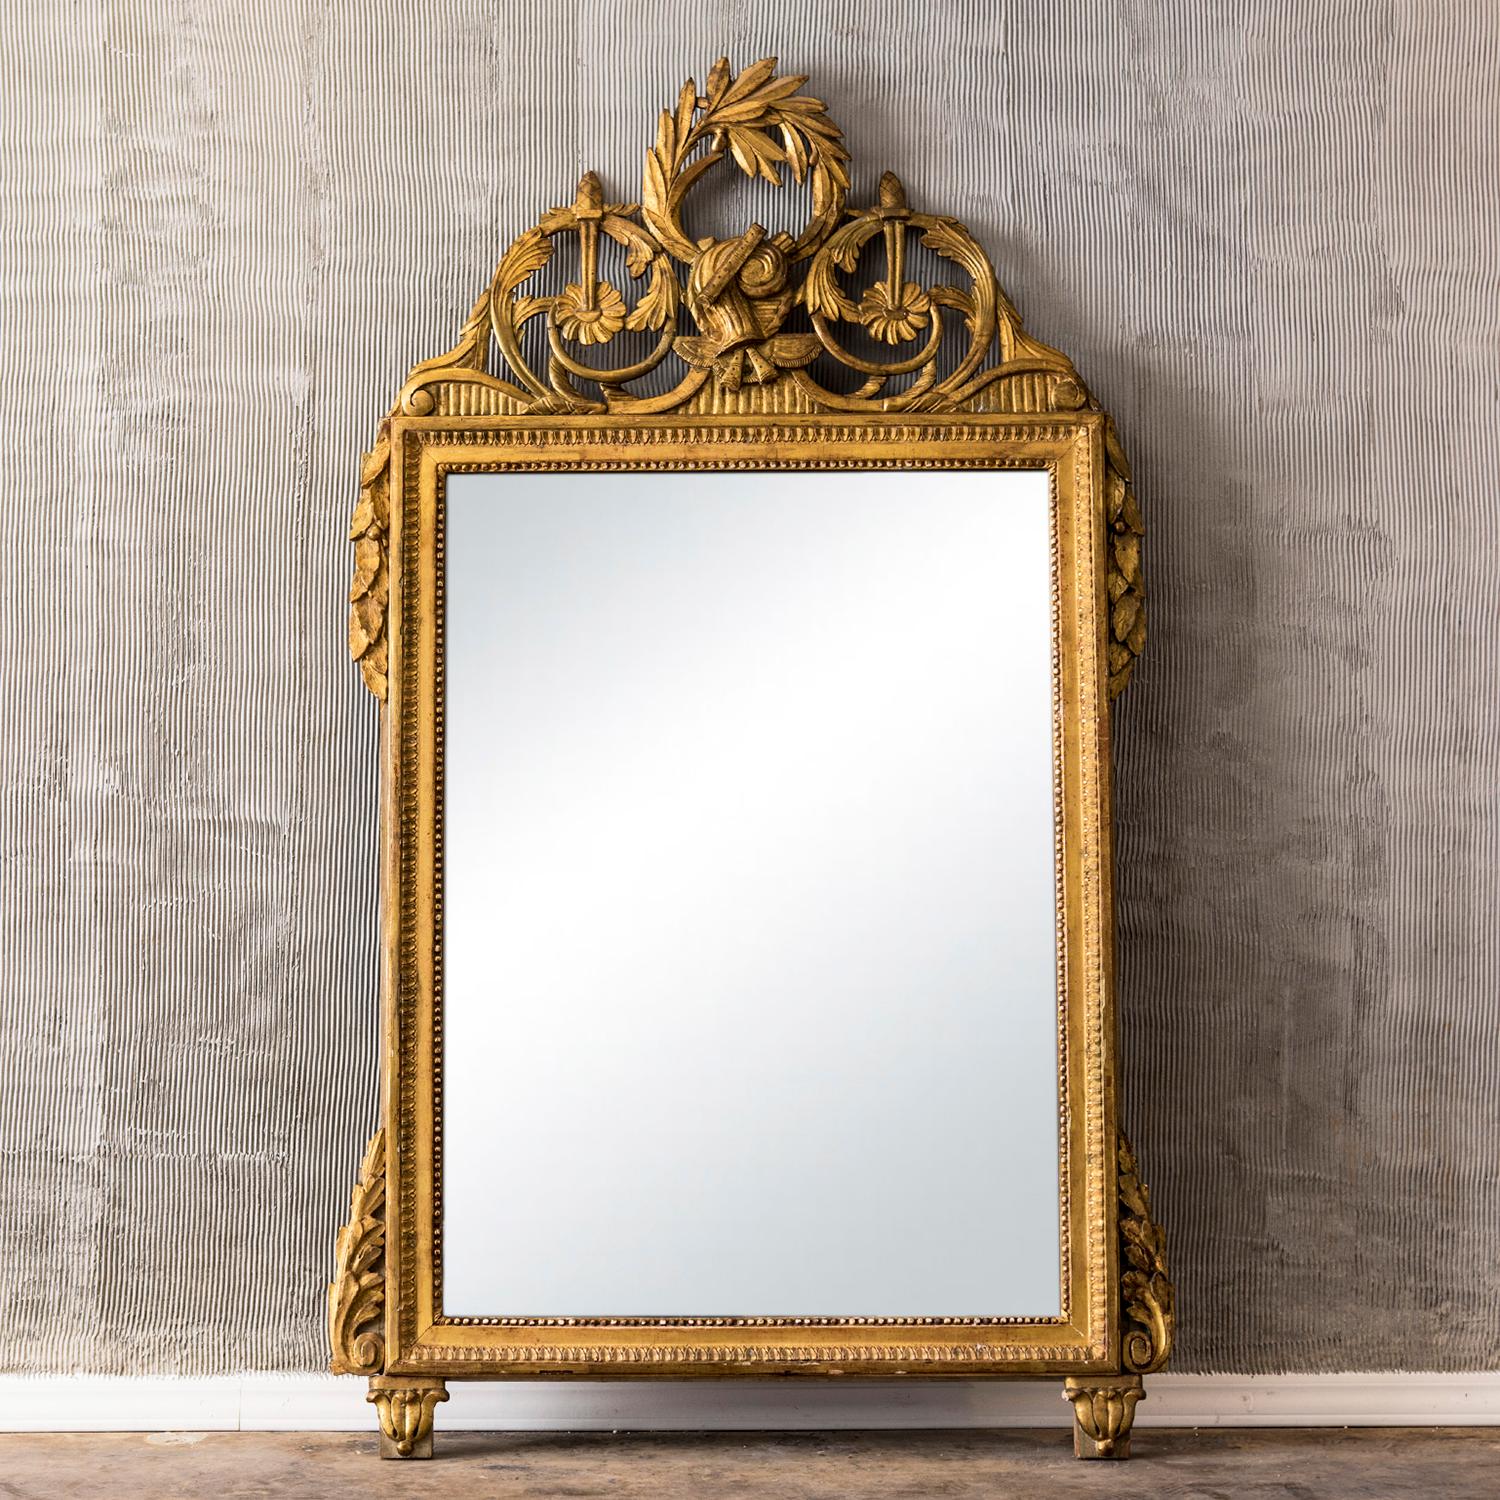 An antique rectangular mirror inscribed in a Pinewood, gilded frame adorned with water leaves and pearl friezes, in good condition. The mirror is consisting its original mirror glass. The Pediment is decorated with a central trophy in the center,